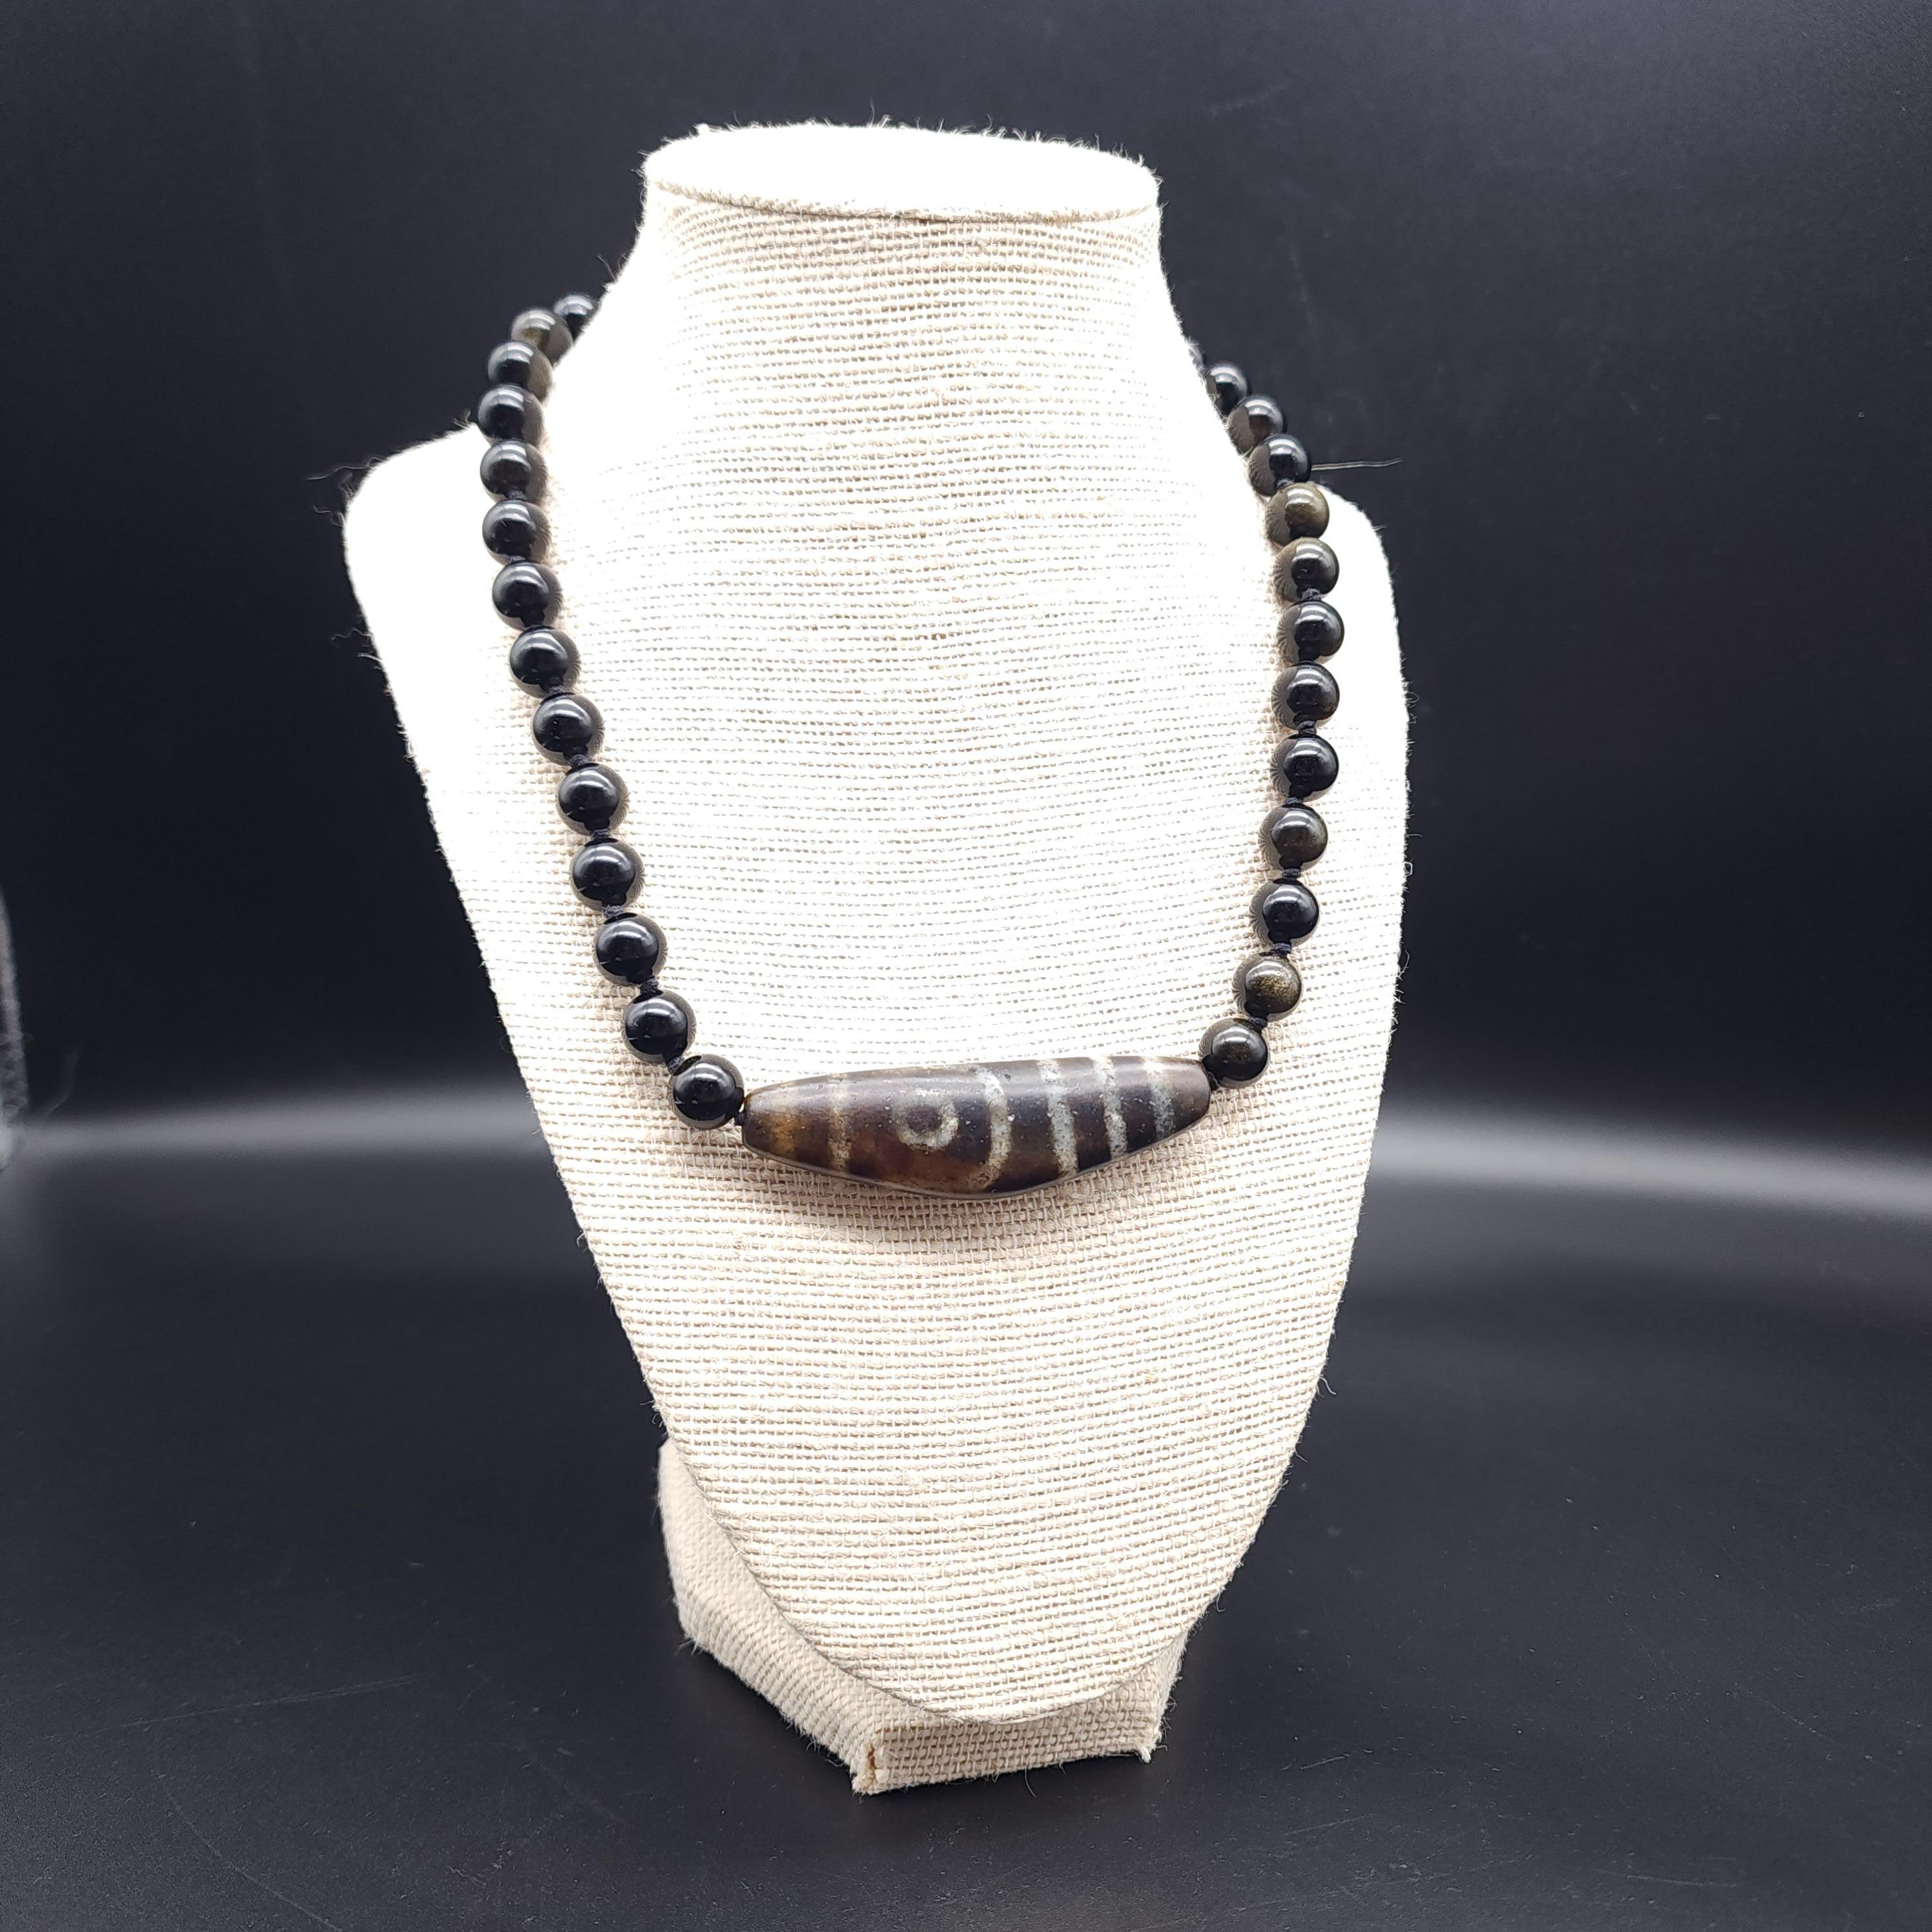 Dzi Pendant Centerpiece, Obsidian Beads Knotted Necklace  Sterling Silver Clasp In Excellent Condition For Sale In Milford, DE